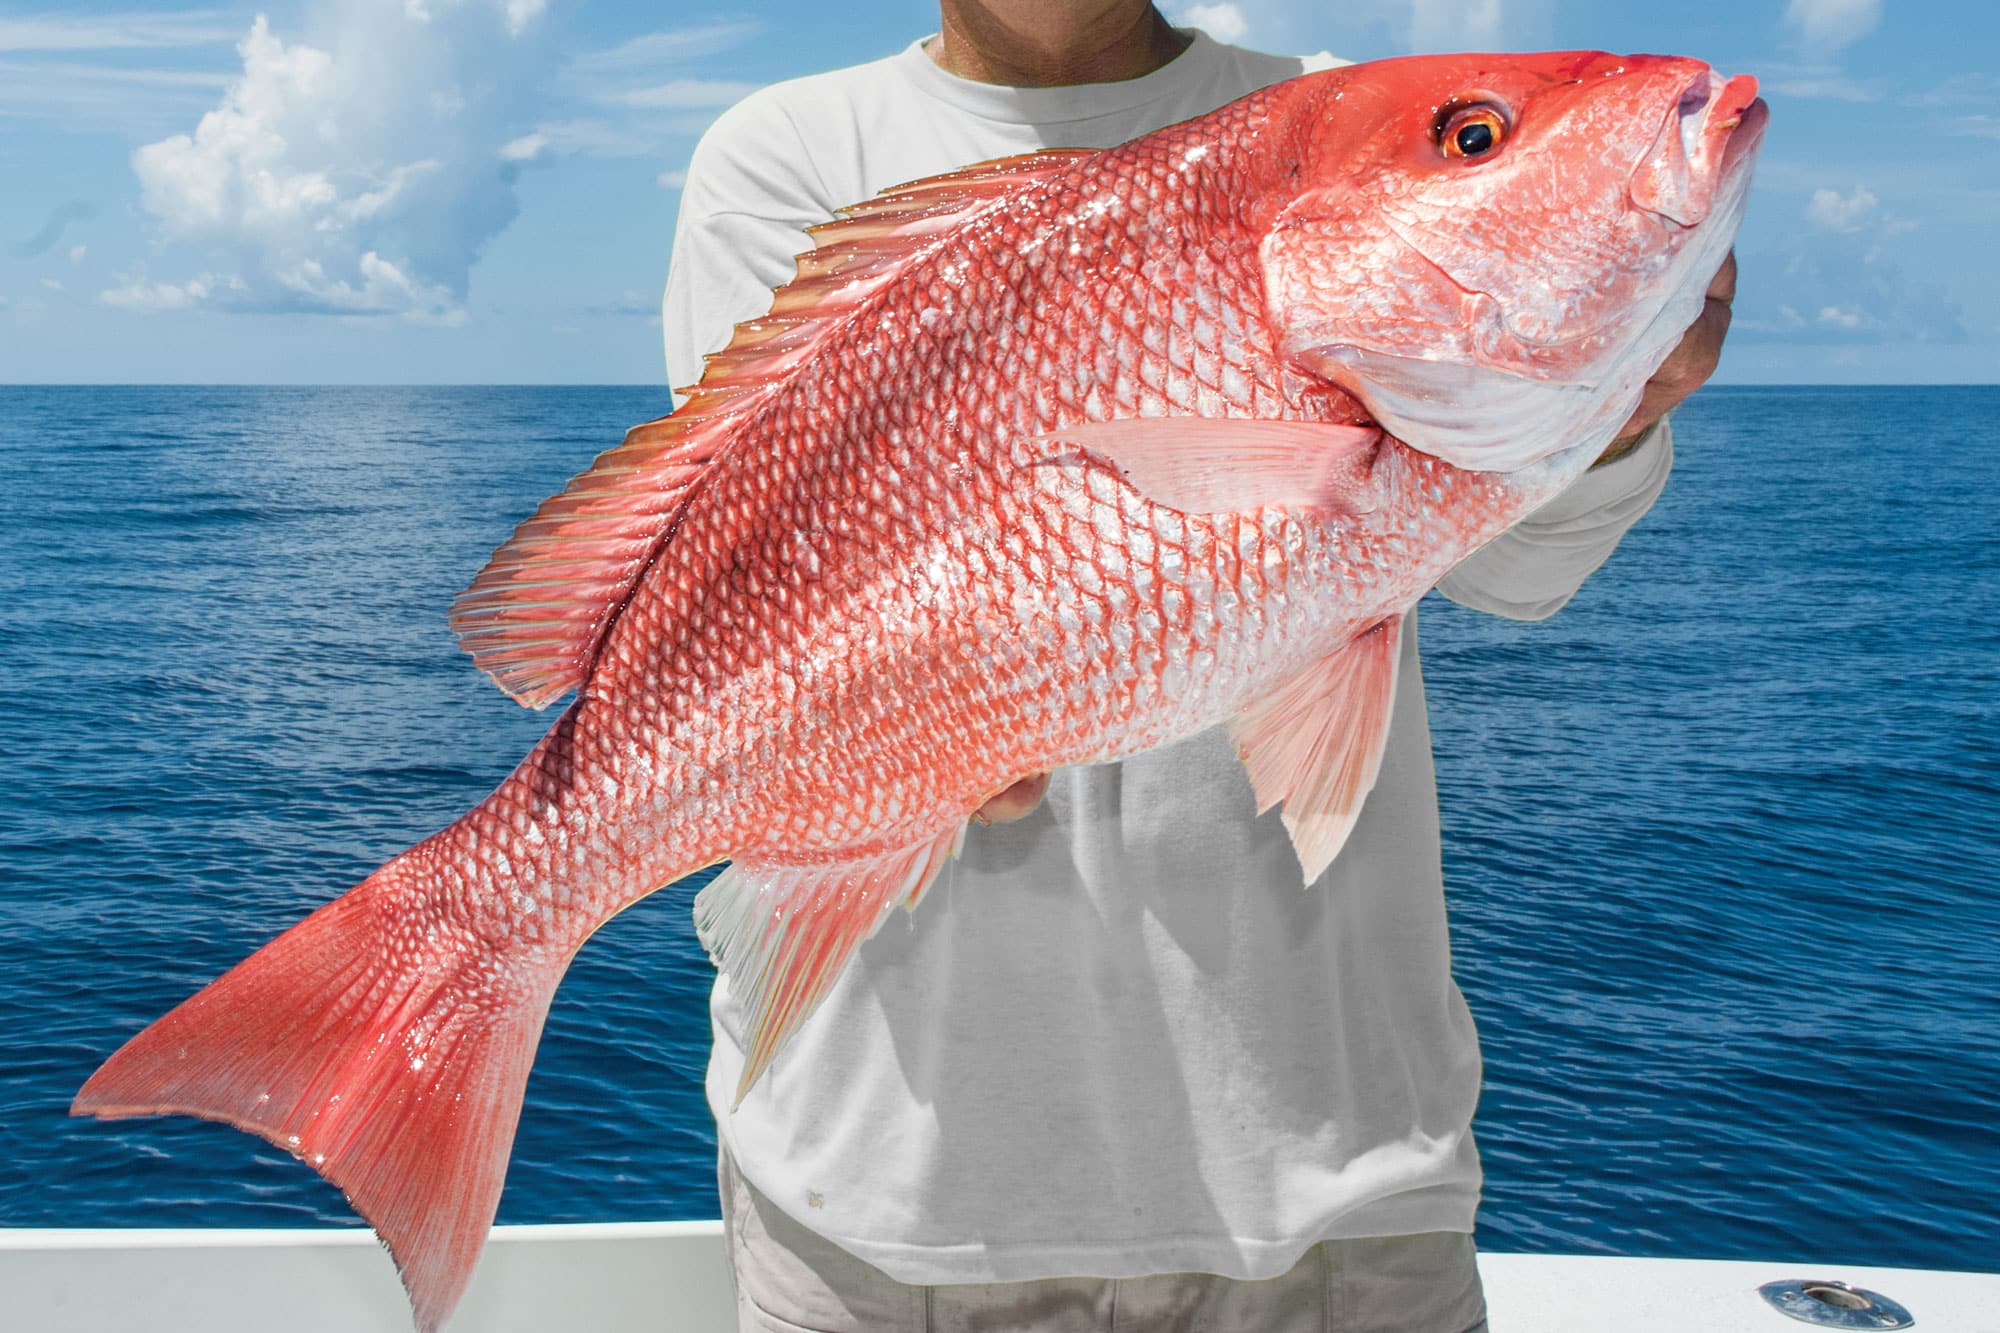 Snapper Fishing, How to Catch Snapper